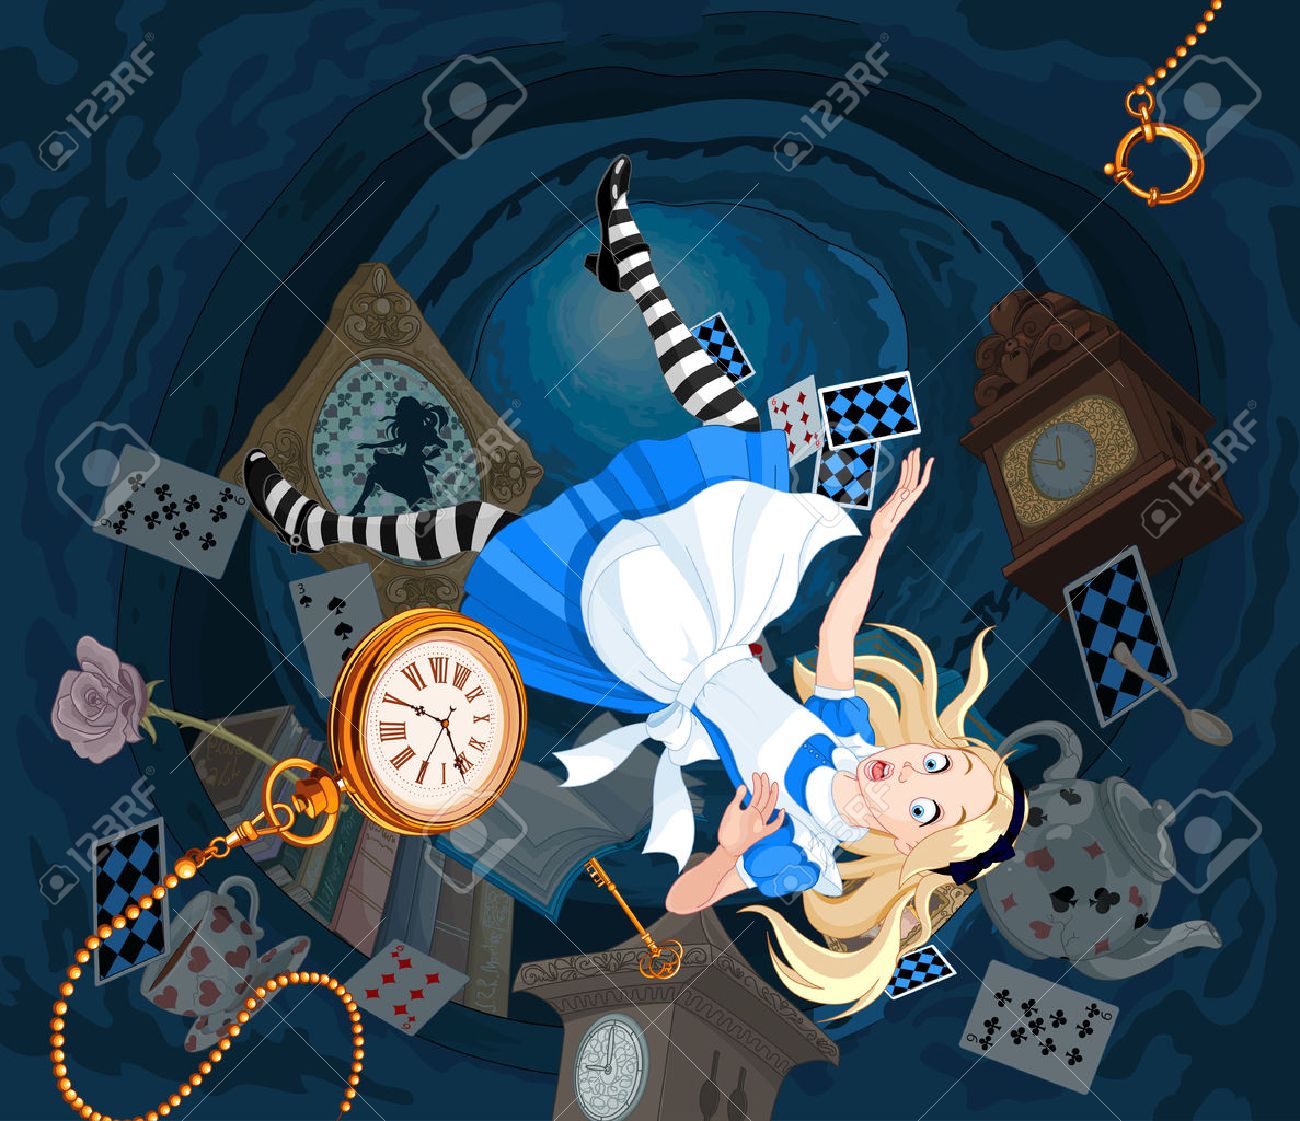 64105780-alice-is-falling-down-into-the-rabbit-hole.jpg